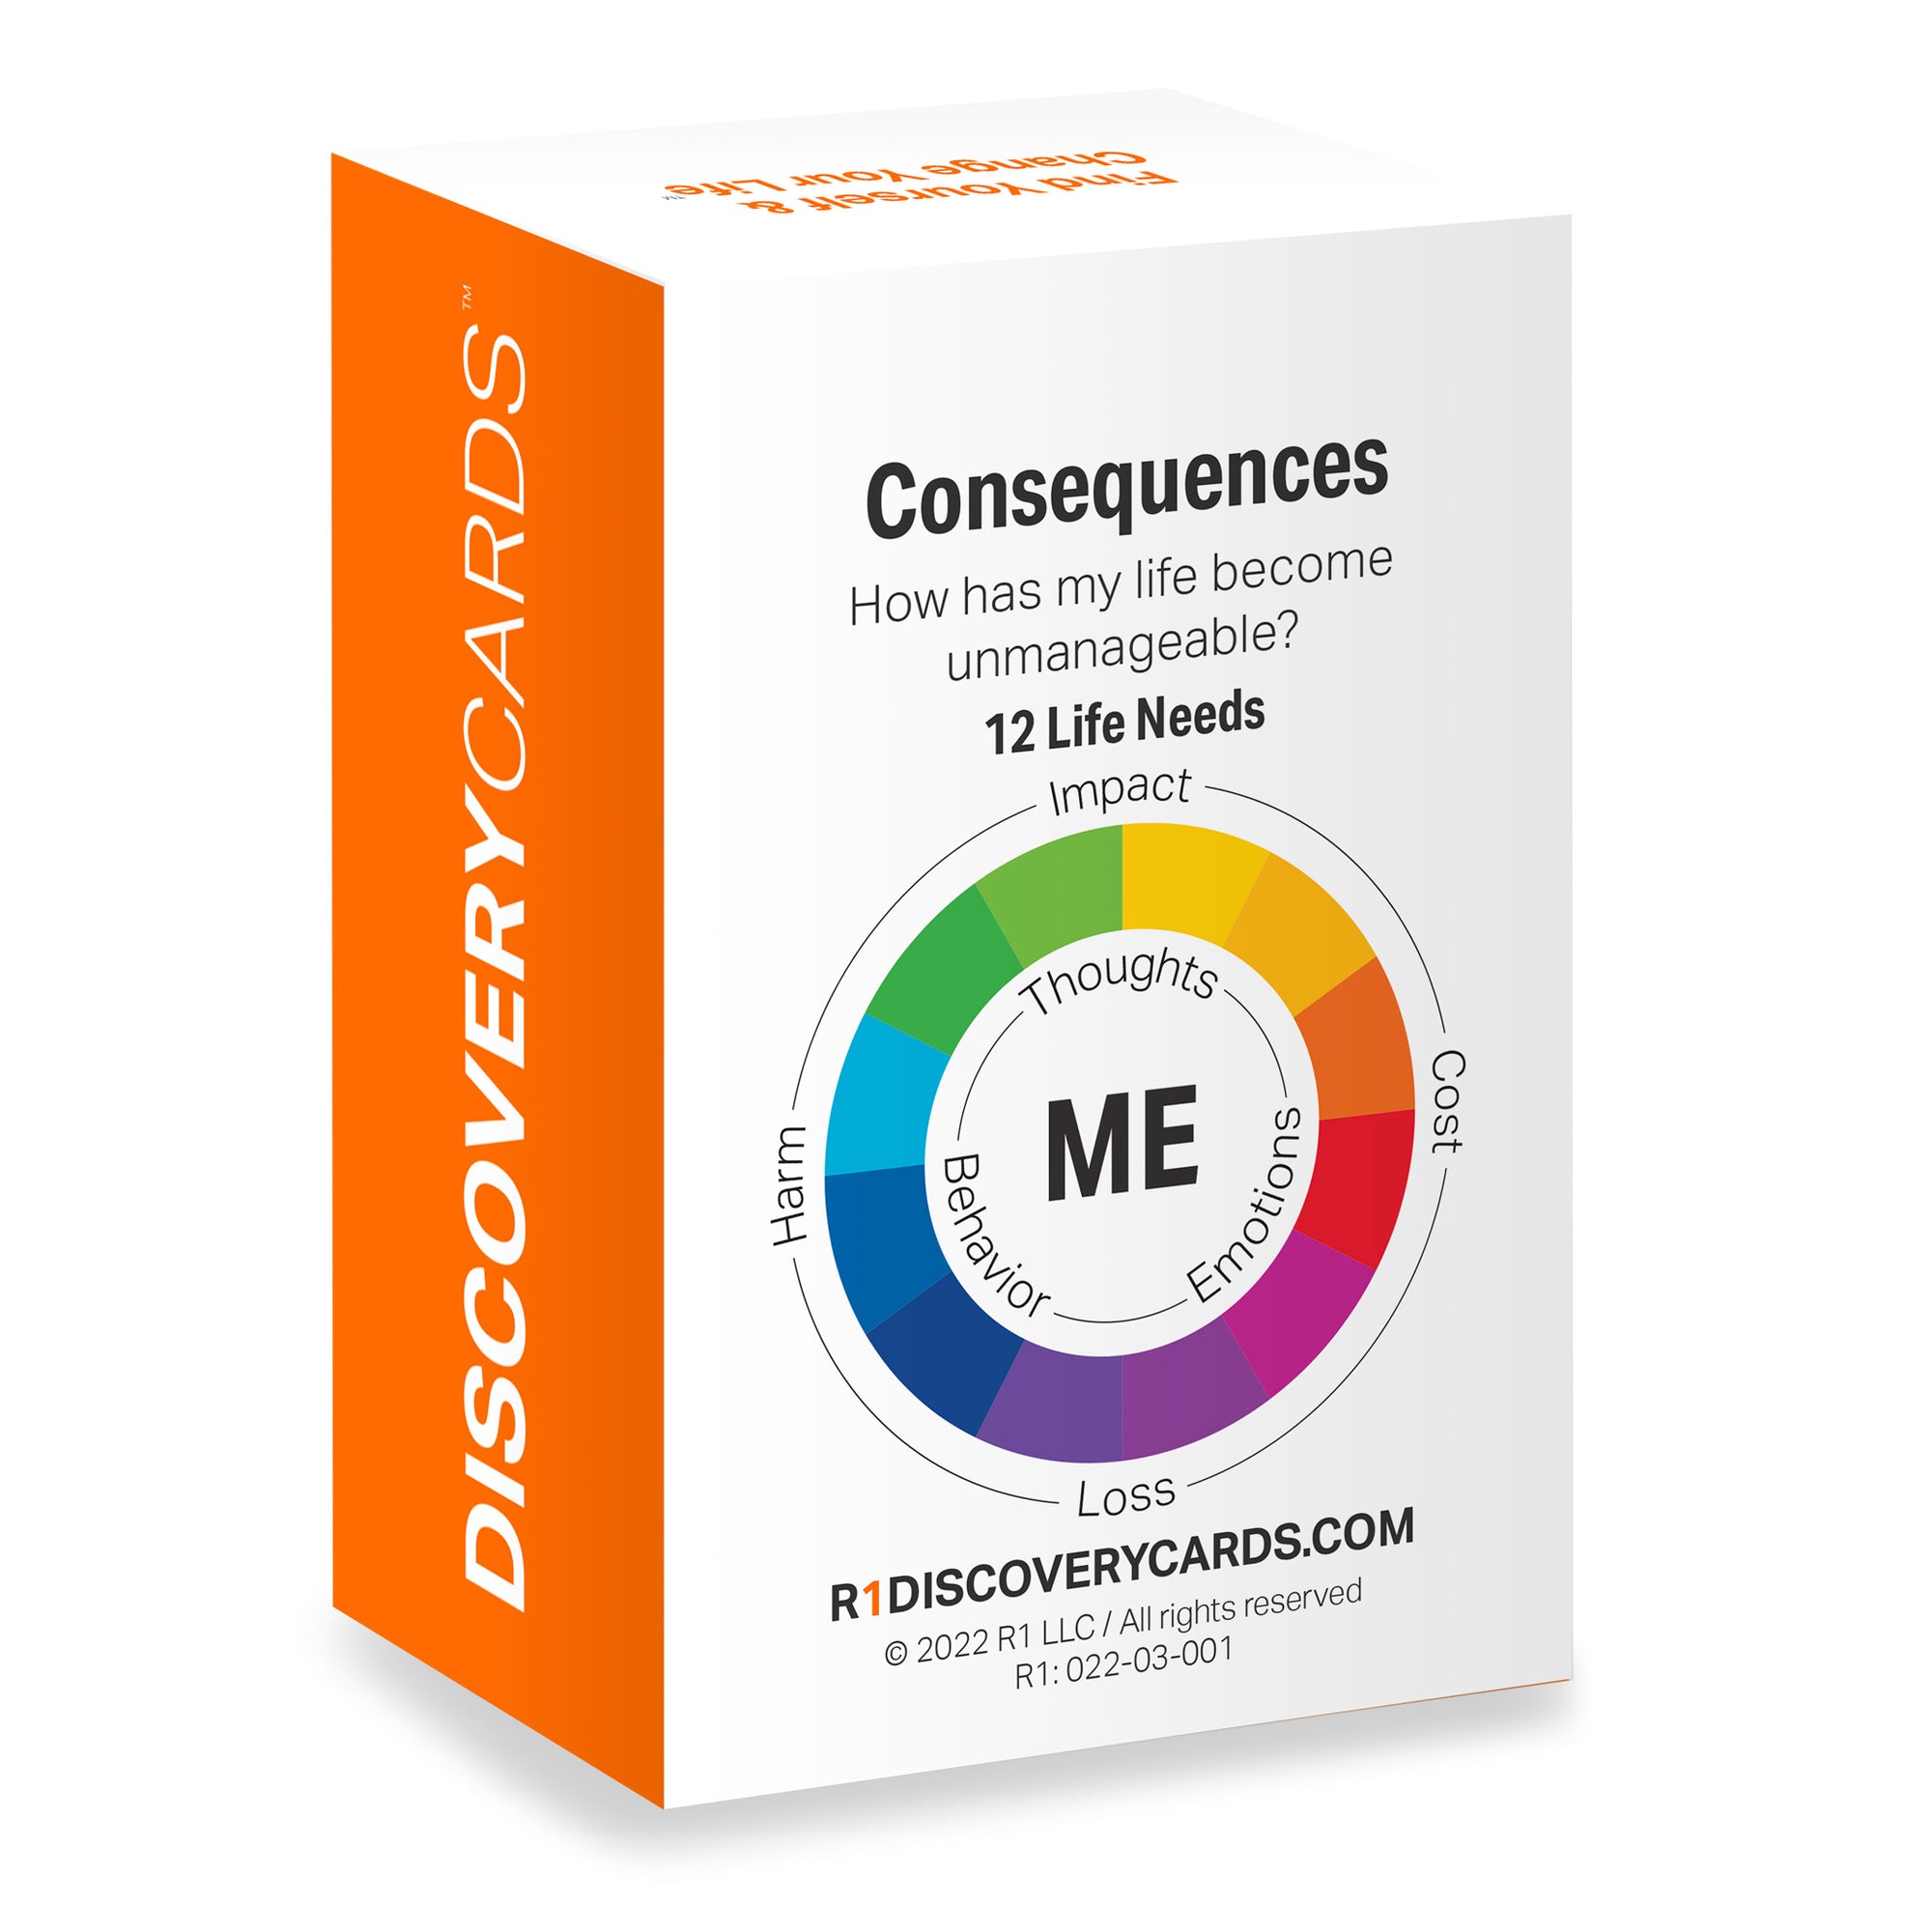 Consequences of Addiction Topic Kit — 1 deck